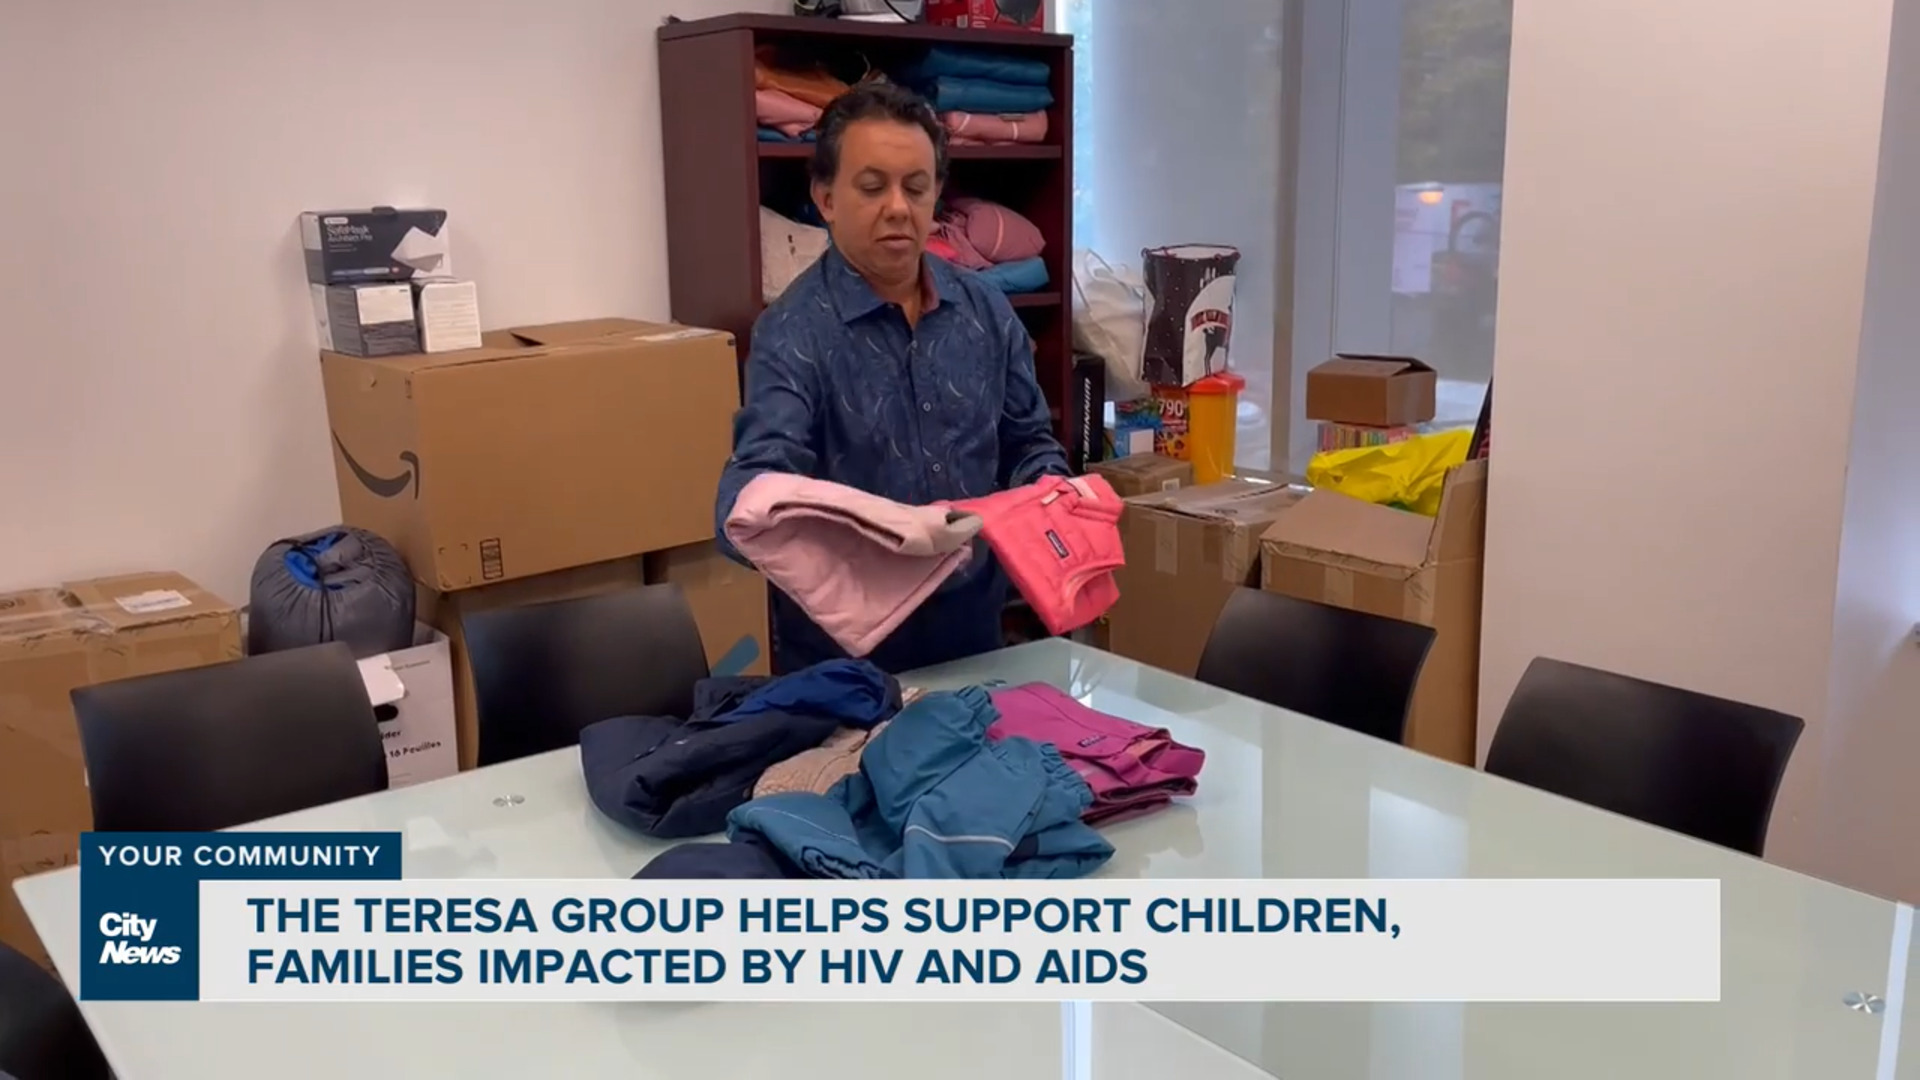 The Teresa Group supports youth, families impacted by HIV and AIDS